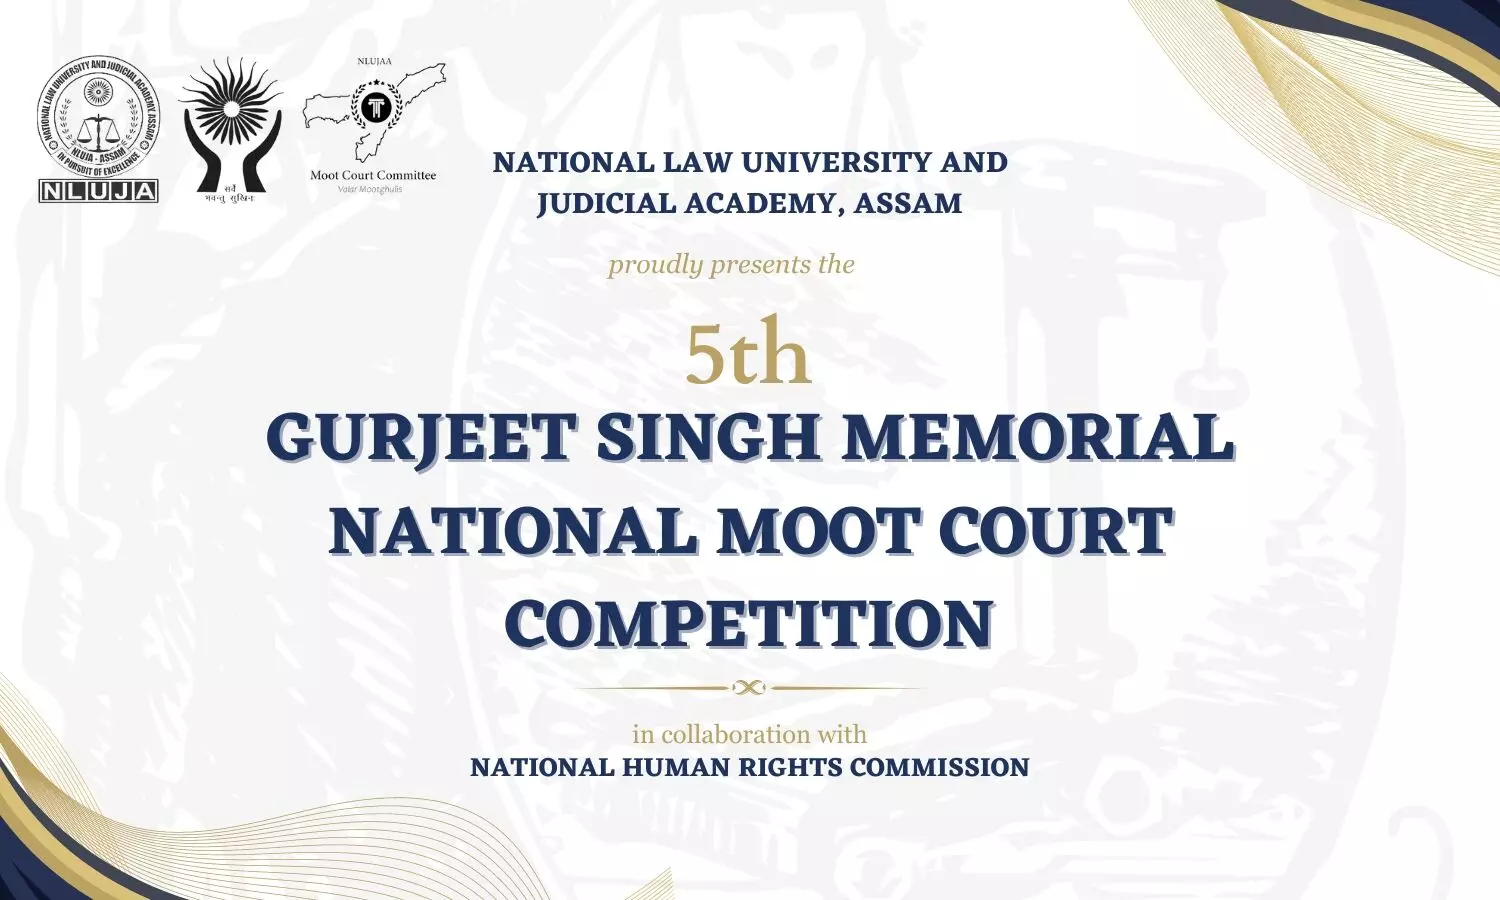 5th Gurjeet Singh Memorial National Moot Court Competition